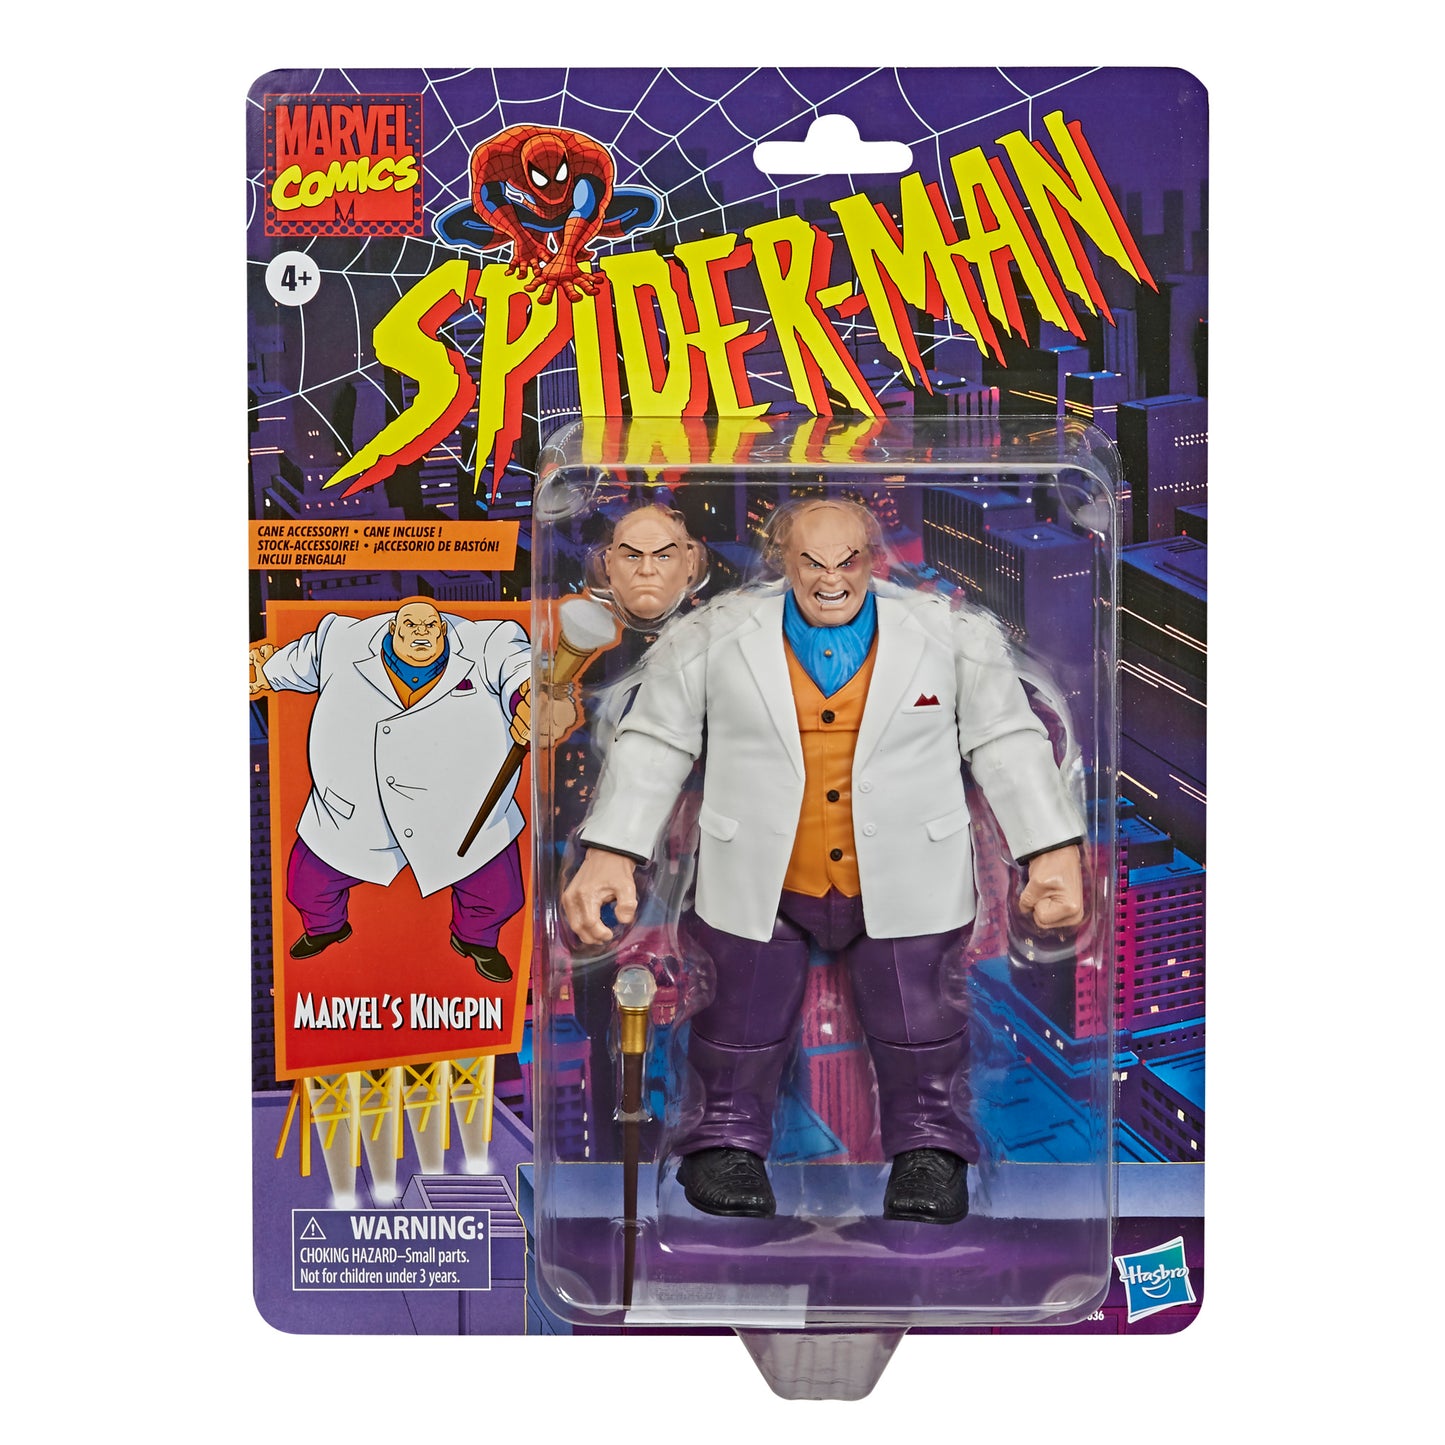 Hasbro Marvel Legends Series 6-inch Collectible Marvel’s Kingpin Action Figure Toy Vintage Collection